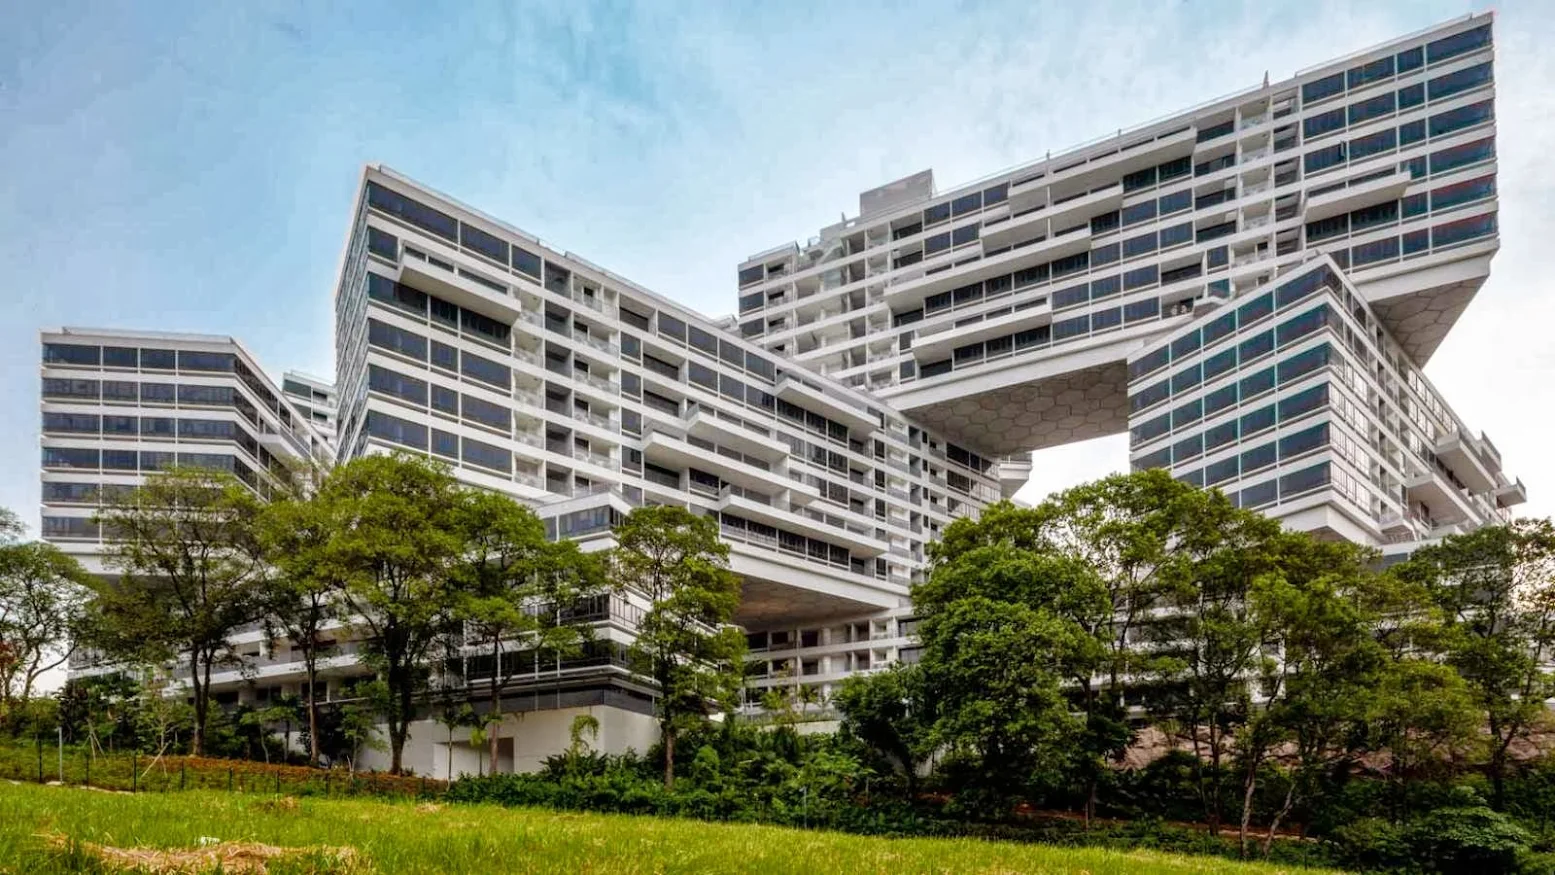 The Interlace by OMA